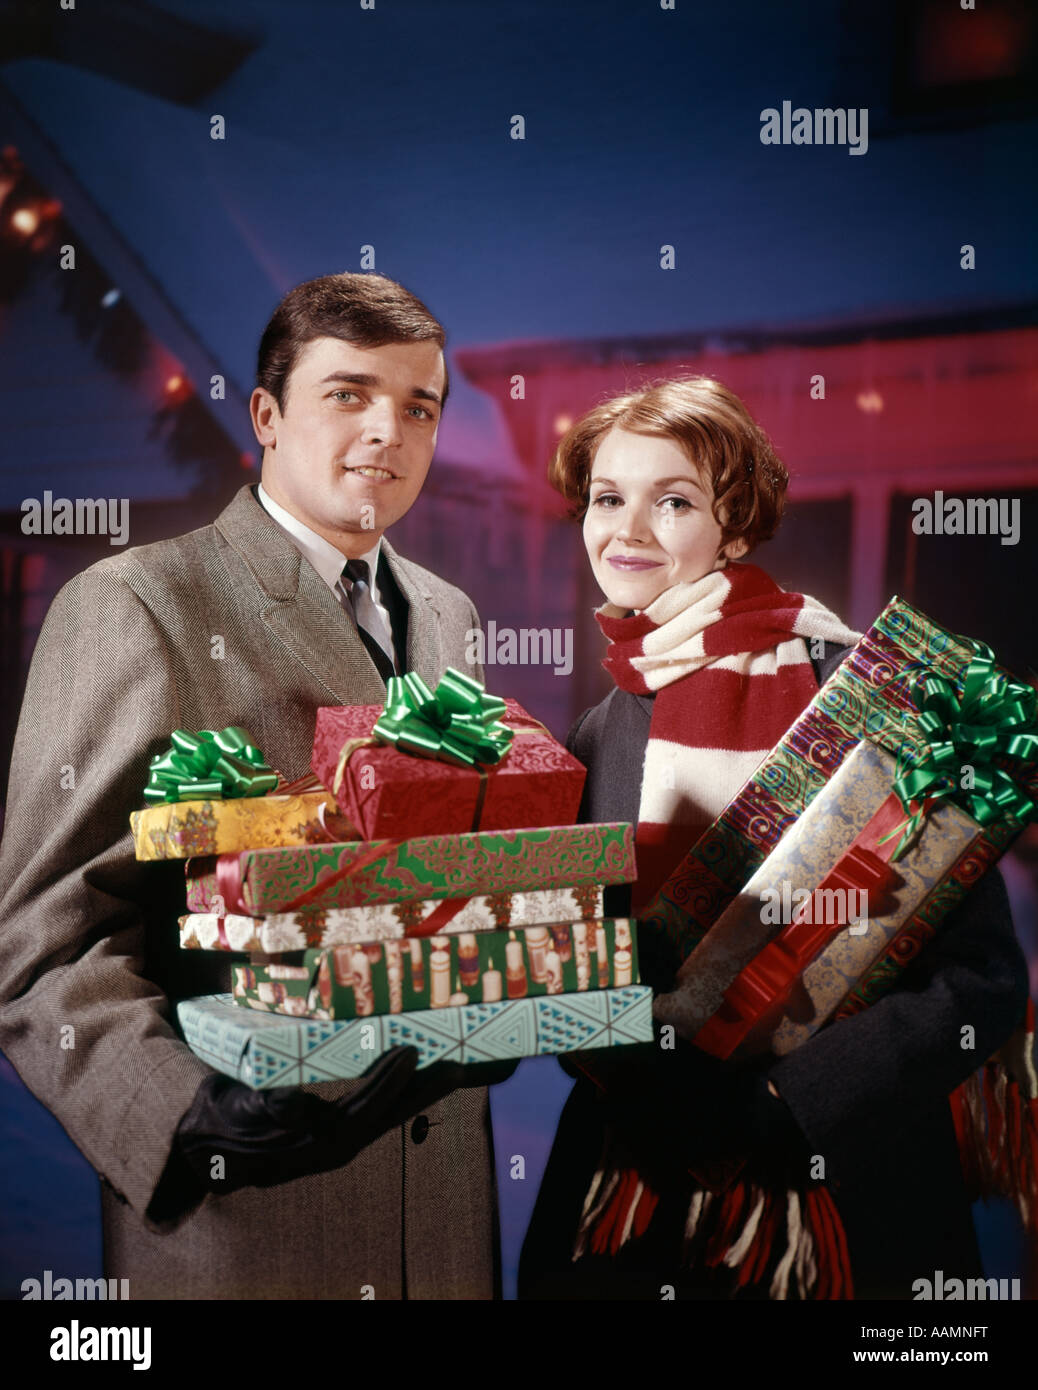 1960 1960s 1970 1970s COUPLE MAN WOMAN HOLDING STOCK PRESENTS GIFTS IN FRONT OF HOUSE DECORATED WITH LIGHTS STUDIO RETRO Stock Photo